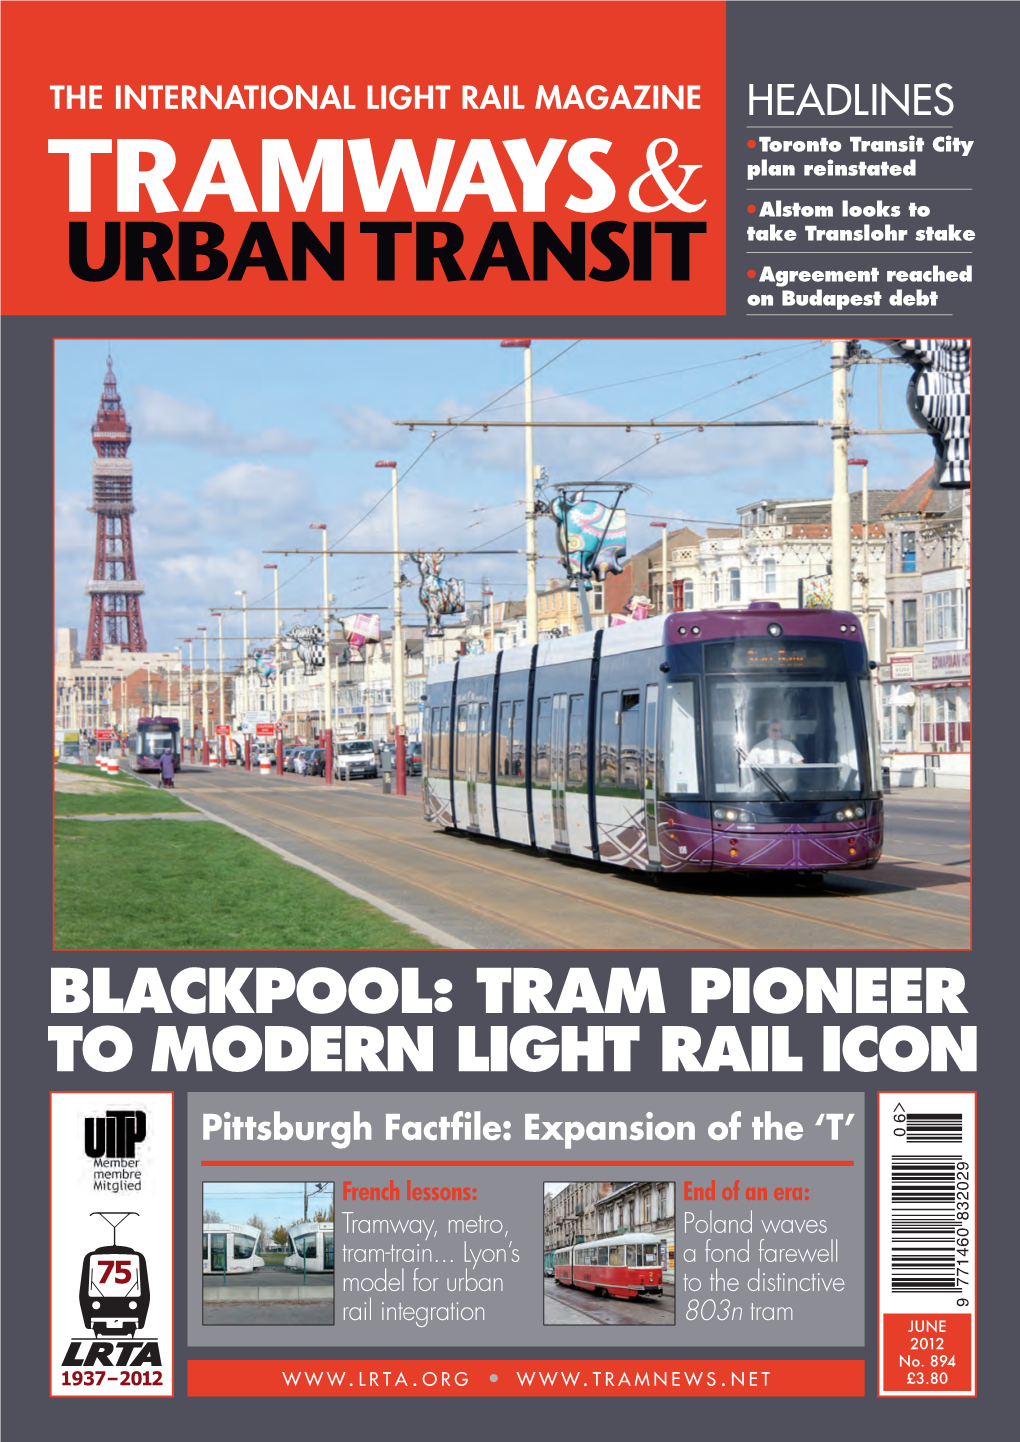 Blackpool: Tram Pioneer to Modern Light Rail Icon Pittsburgh Factfile: Expansion of the ‘T’